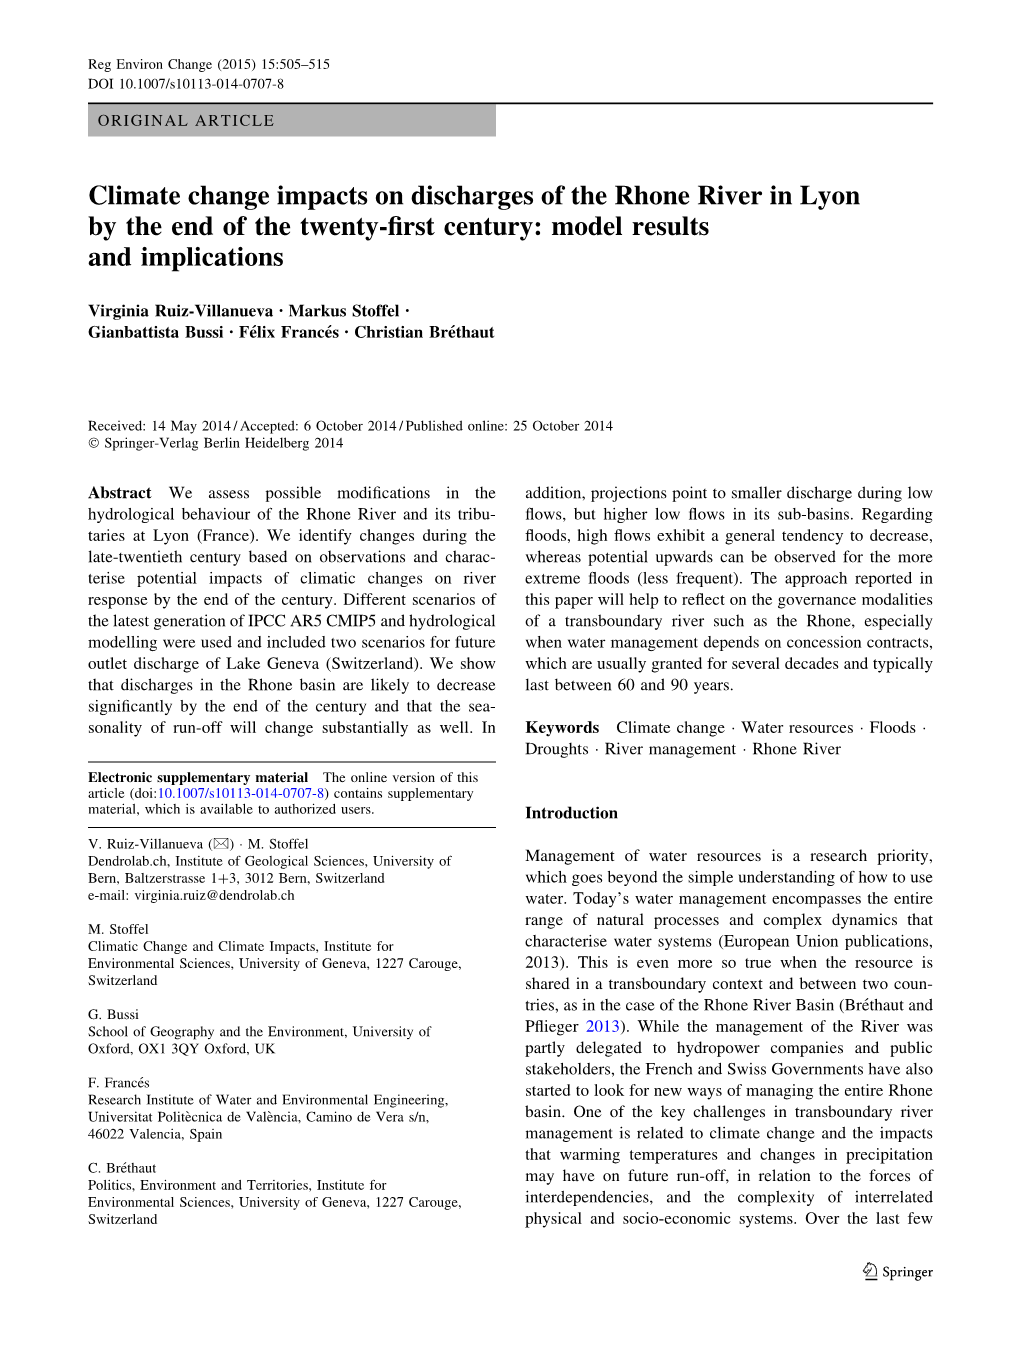 Climate Change Impacts on Discharges of the Rhone River in Lyon by the End of the Twenty-First Century